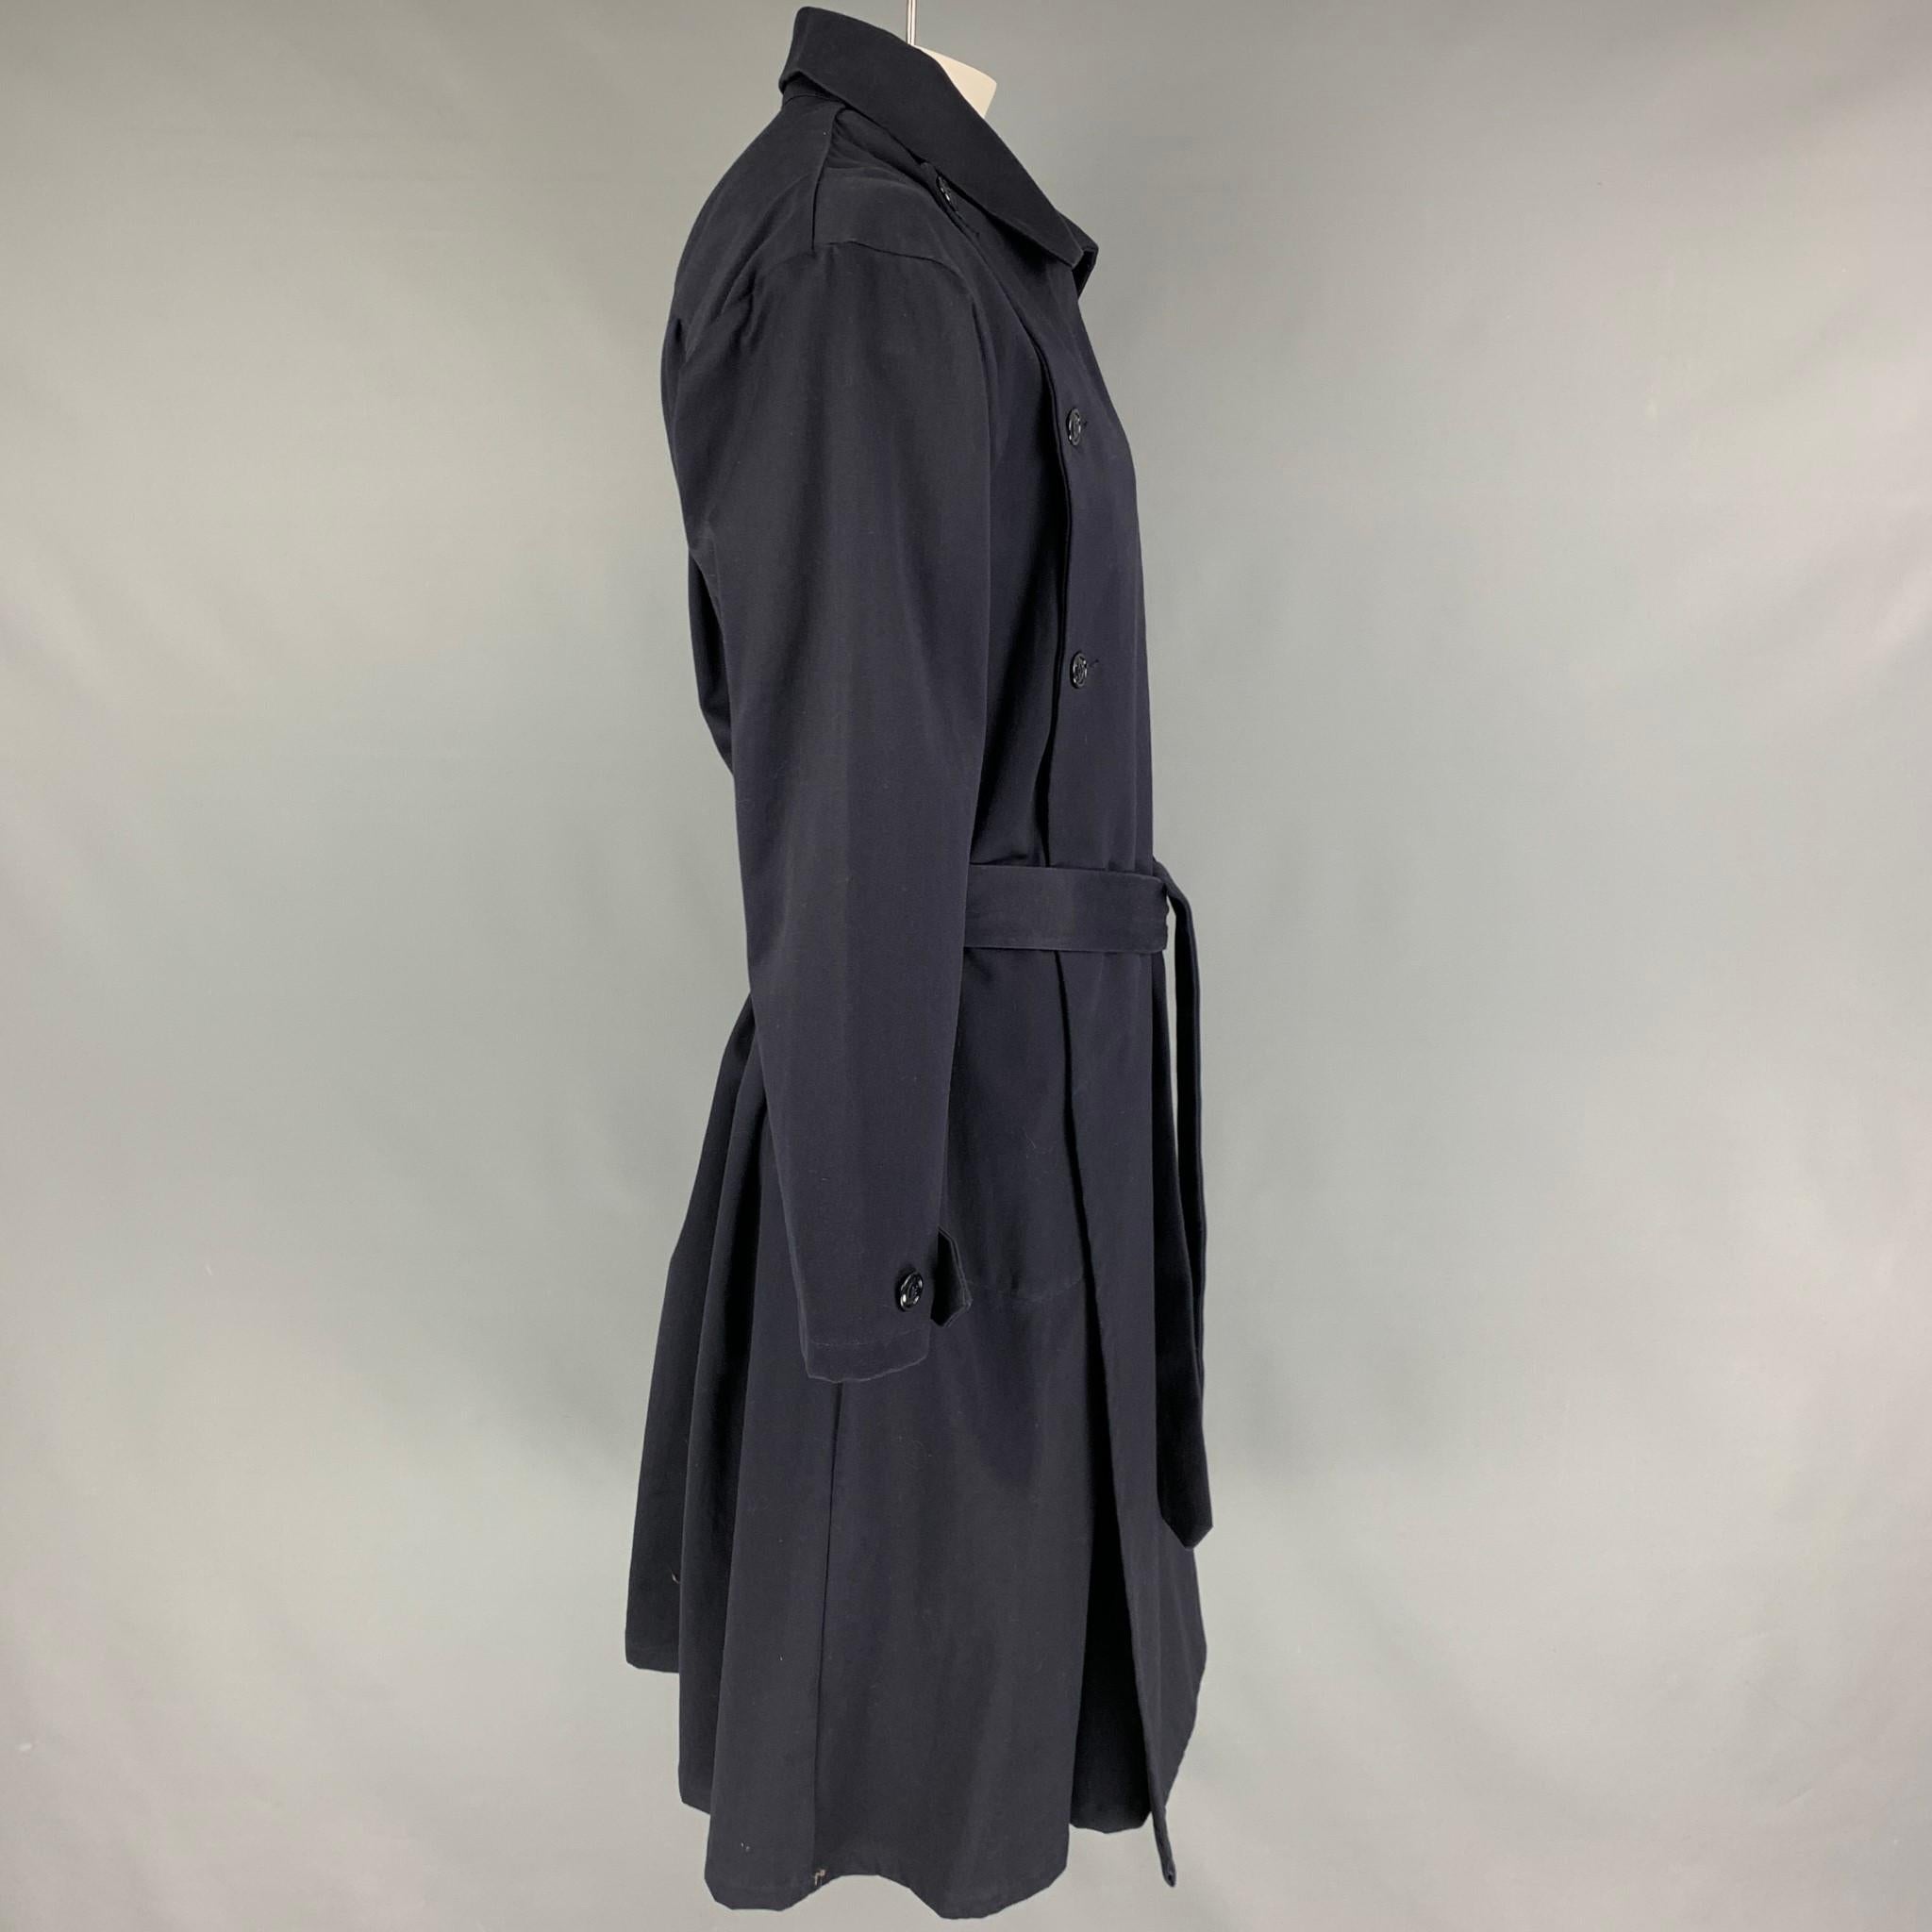 MONITALY coat comes in a water resistant navy sateen material featuring a belted style, slit pockets, anda double breasted closure. Made in USA. 

Very Good Pre-Owned Condition.
Marked: 40

Measurements:

Shoulder: 21 in.
Chest: 40 in.
Sleeve: 24